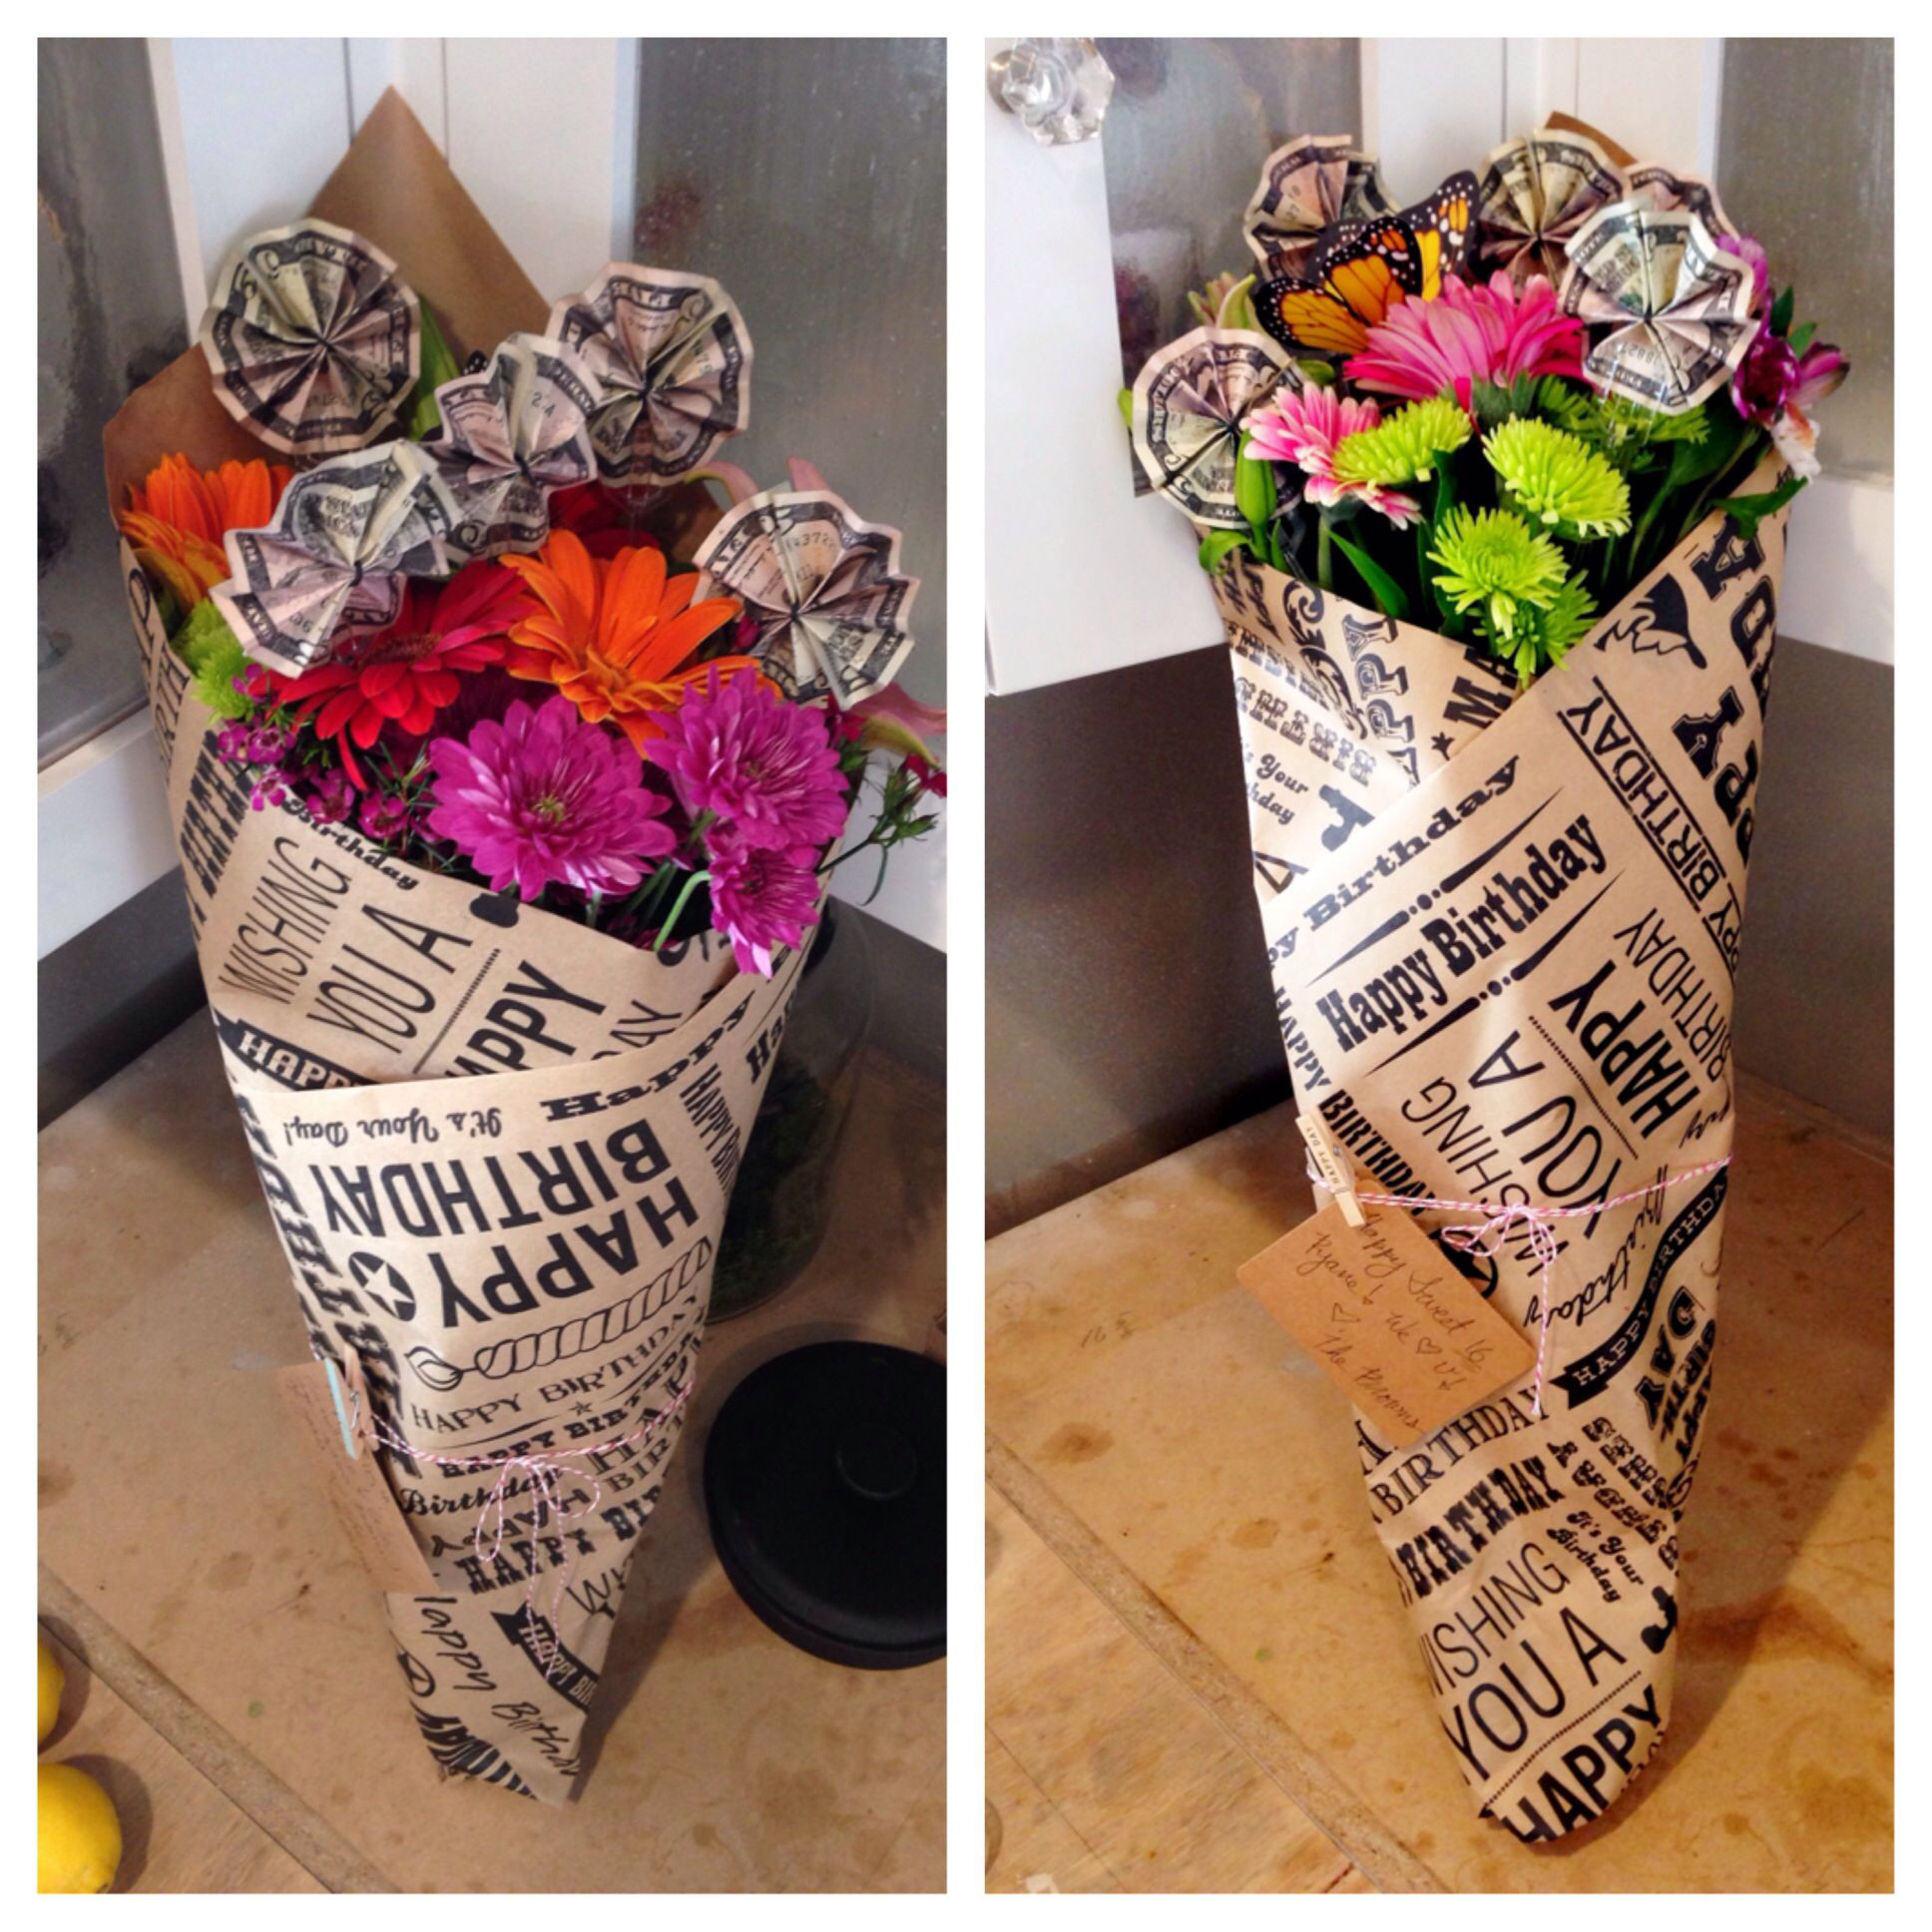 Small Gift Ideas For Girlfriend
 Teen girl t ideas money bouquets Made these for my